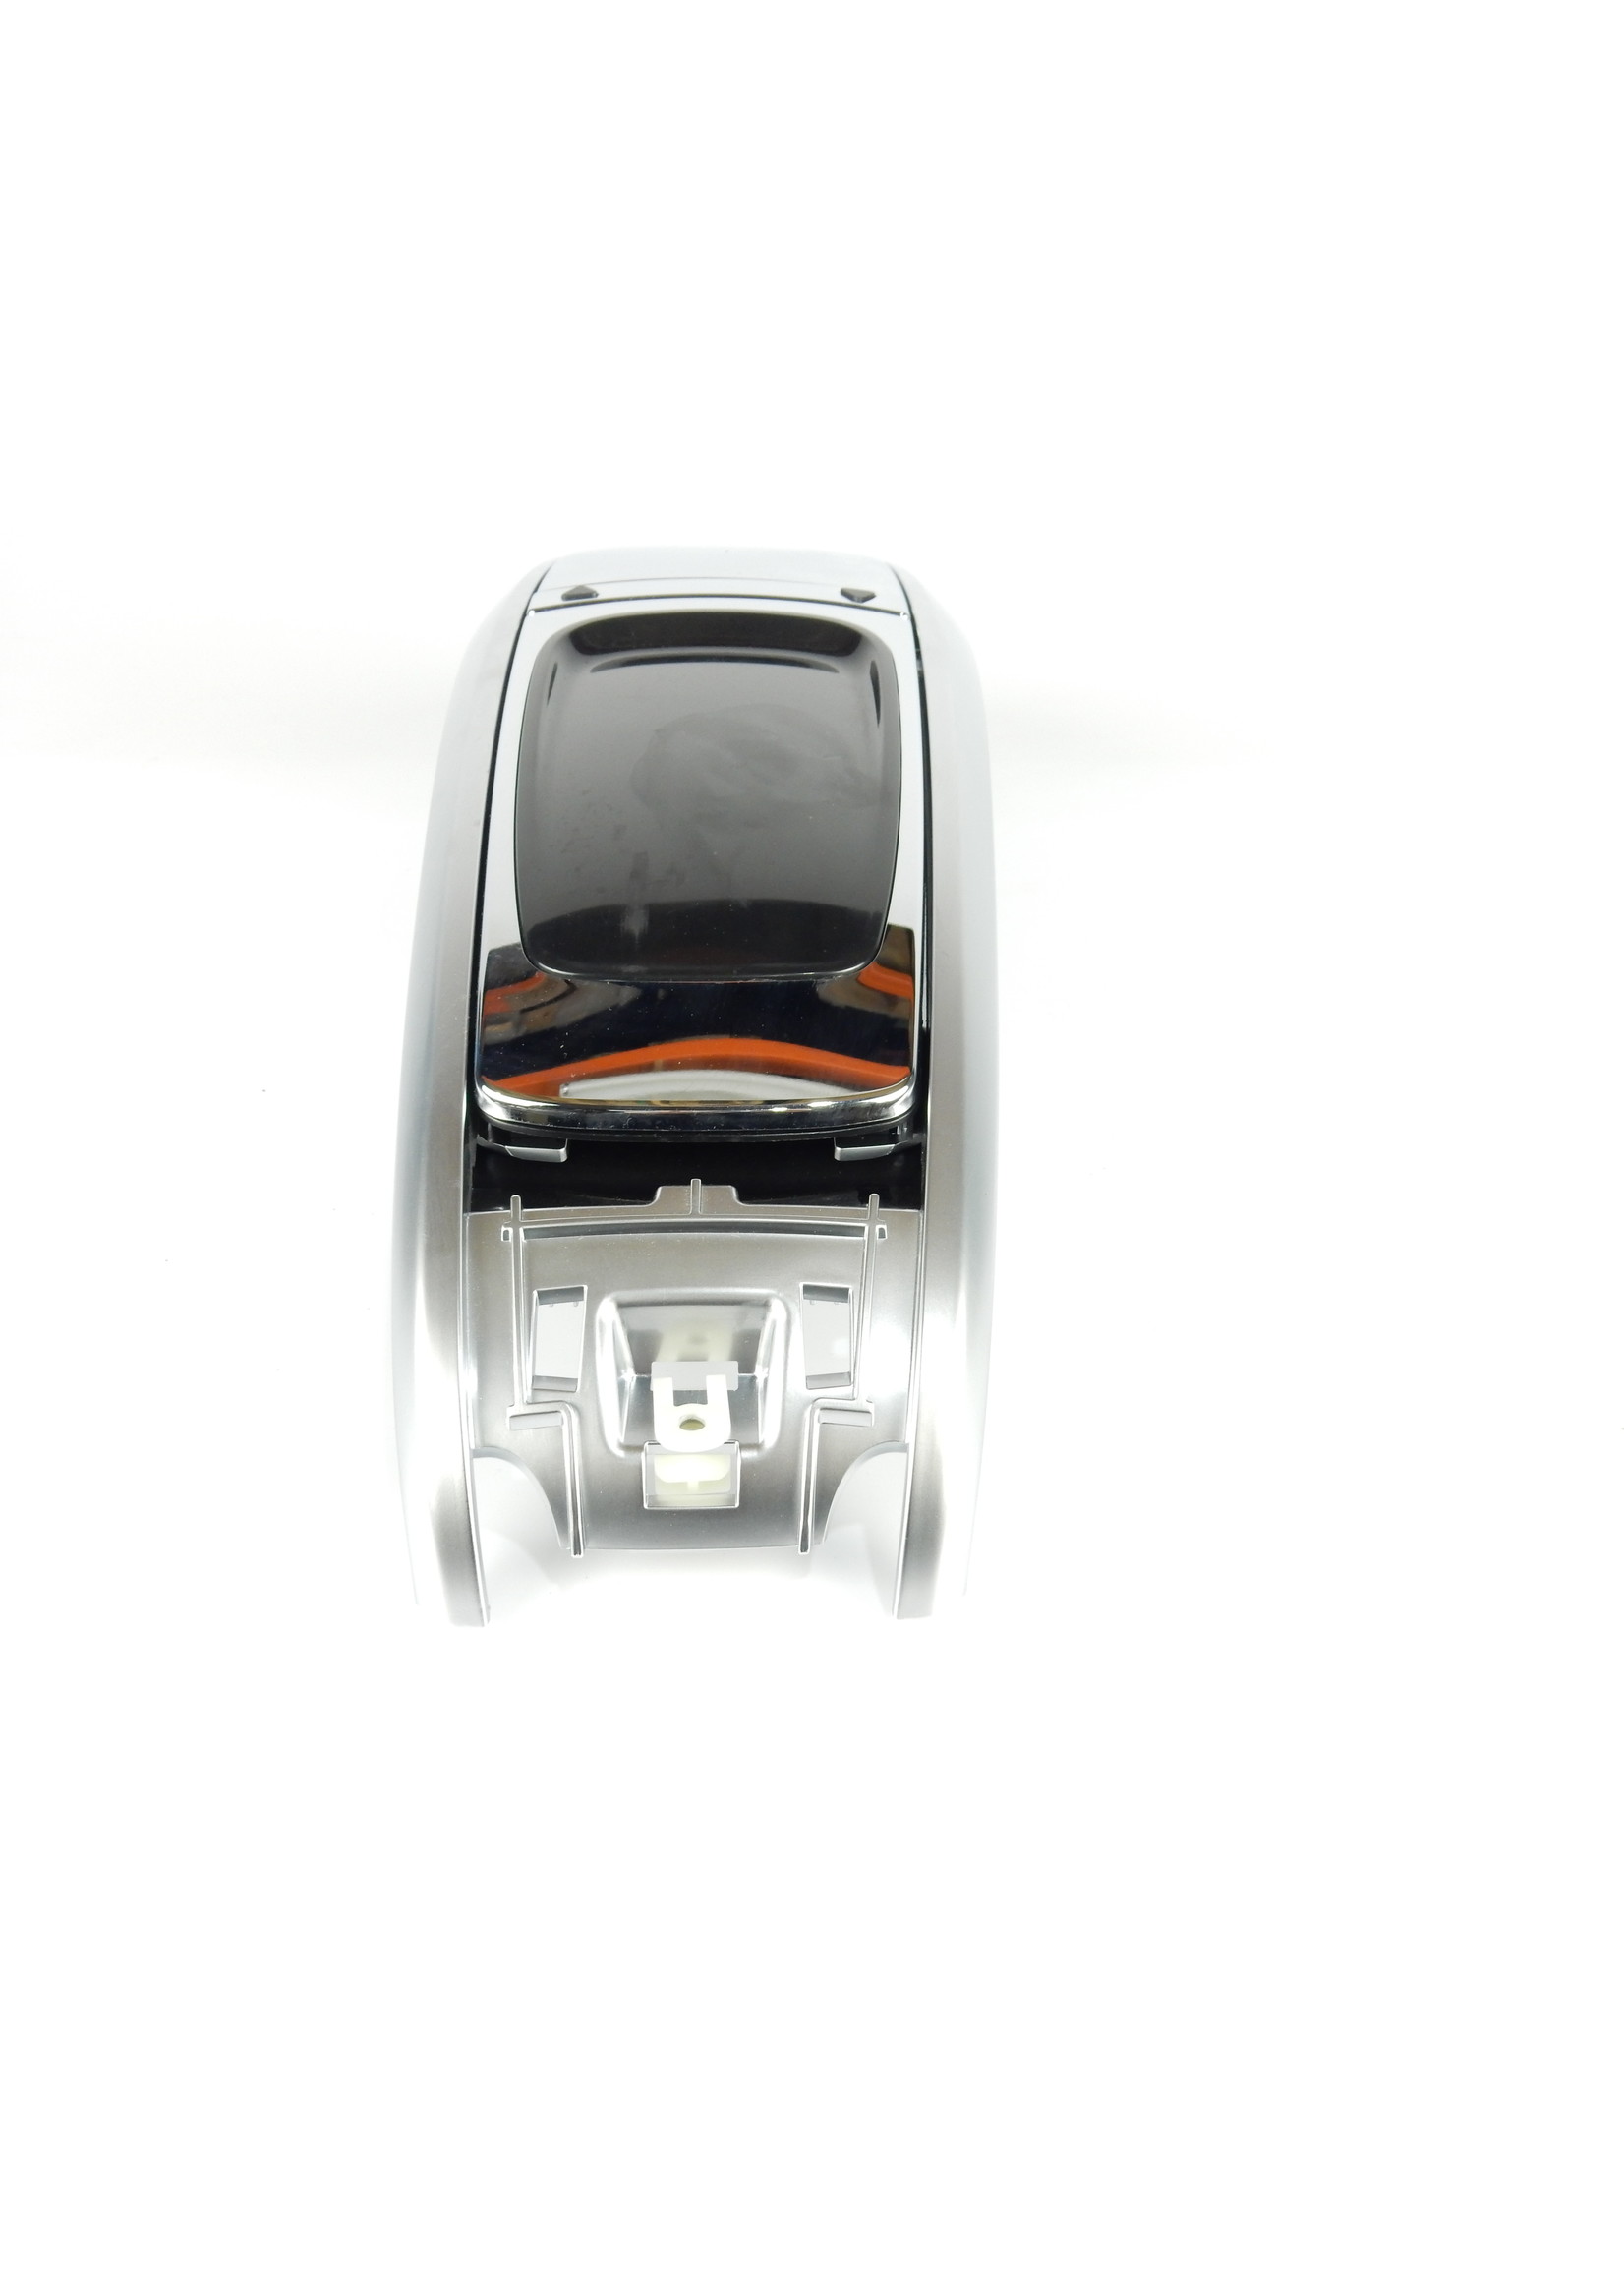 BMW BMW R18 B Transcontinental Tank trim centre CHROME / Storage compartment with charger / 46639829170 / 46639830137